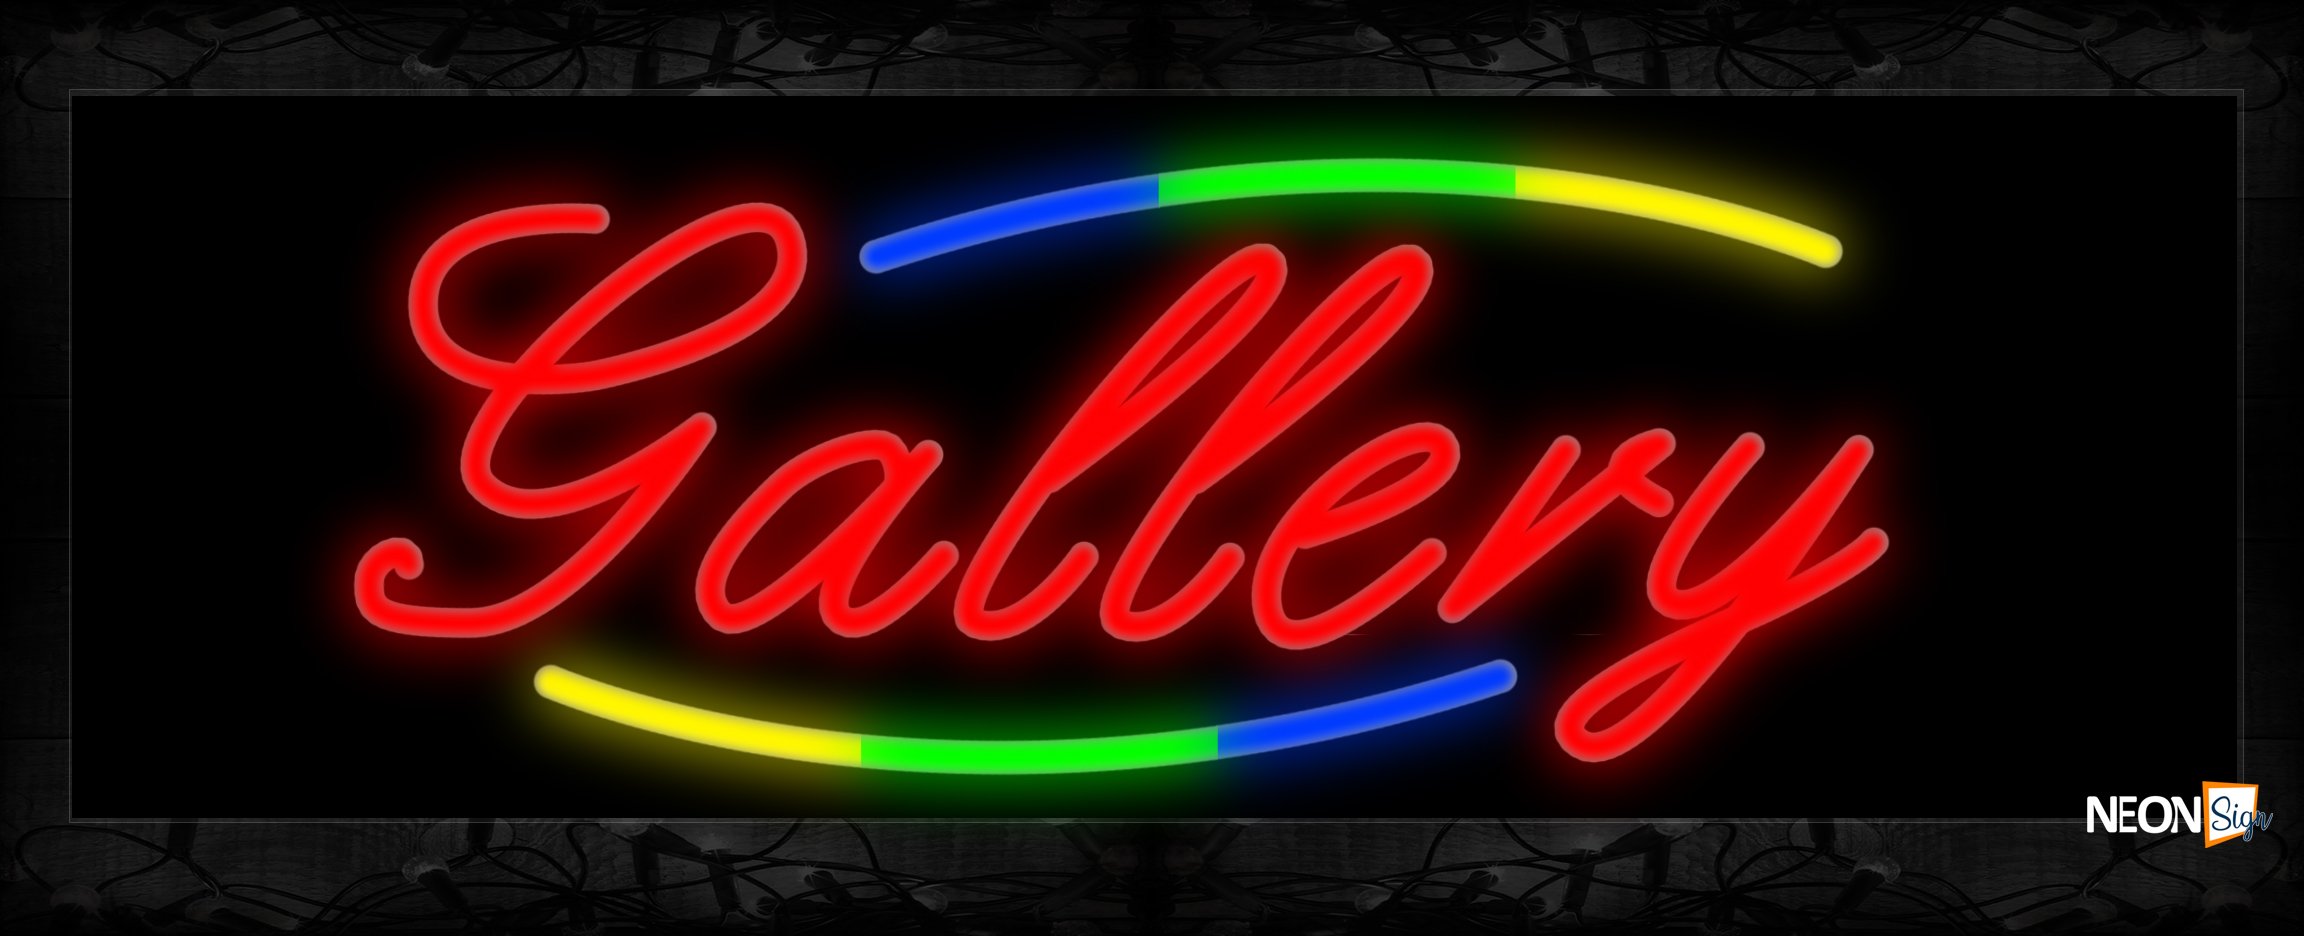 Image of 10801 Neon Sign 13x32 Black Backing